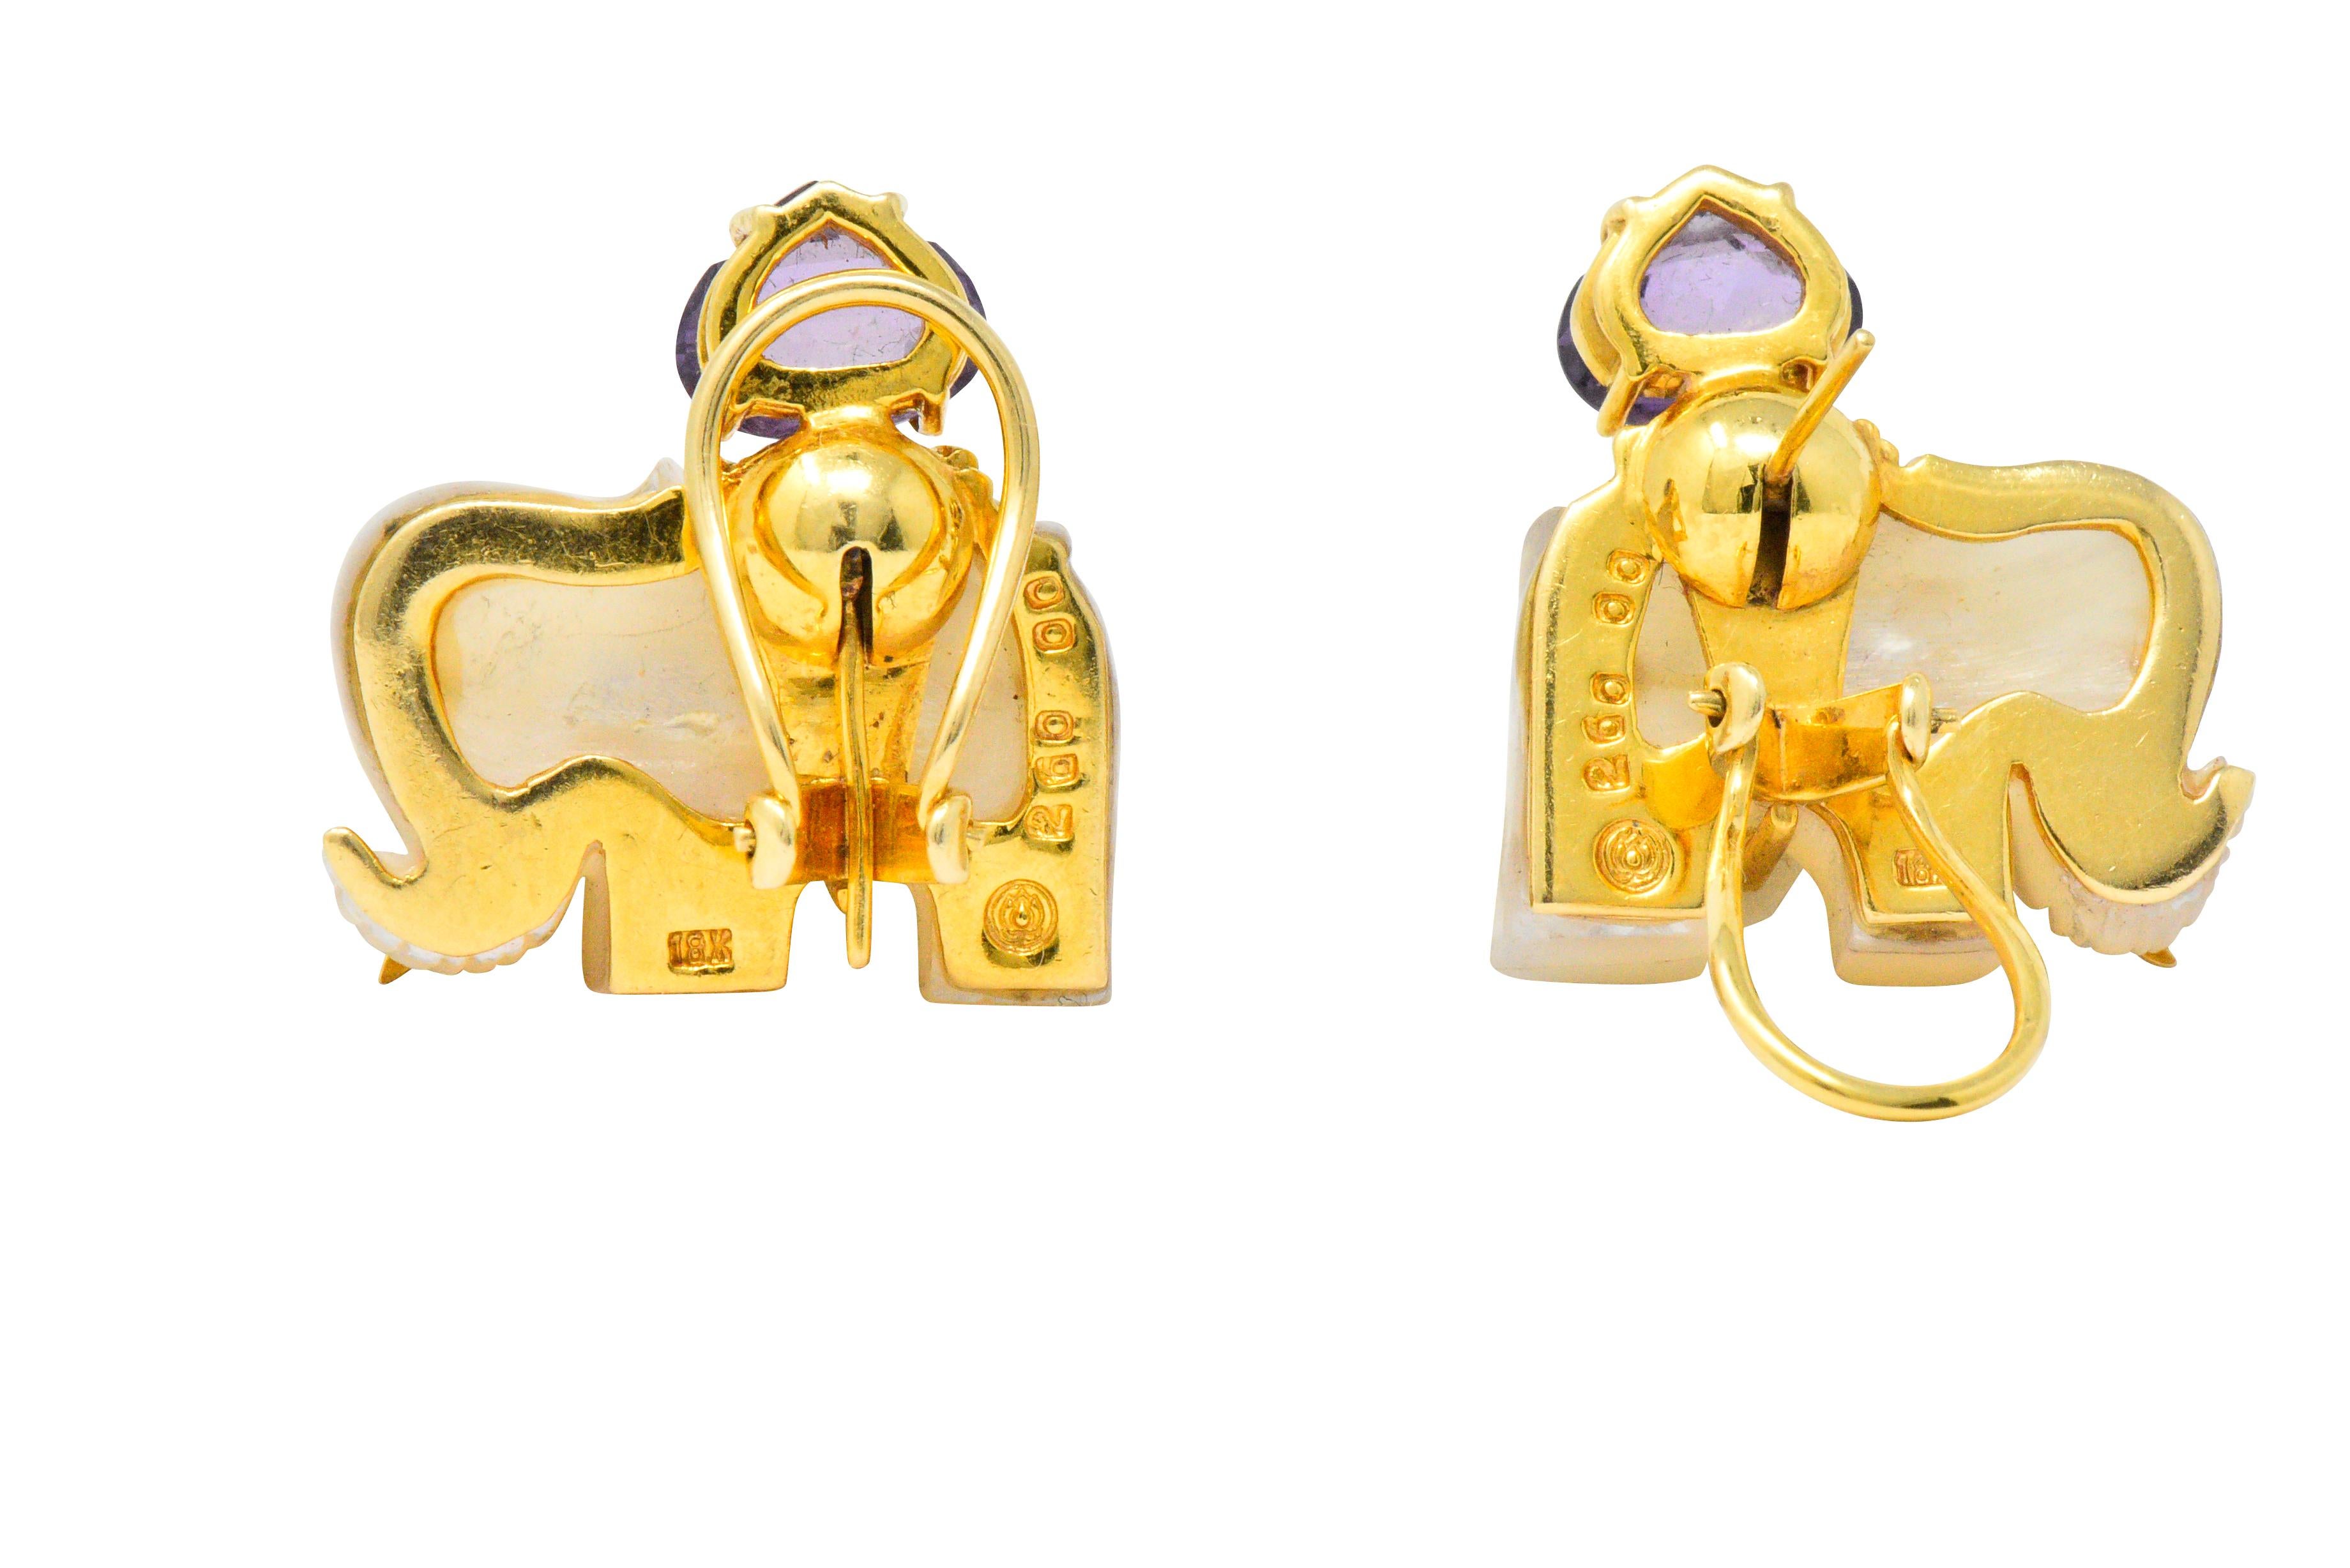 Each with mother-of-pearl carved elephant features a gold saddle, tusks and eyes

A near heart shaped, rose cut amethyst accent atop each saddle

Round brilliant cut diamond eyes, weighing approximately 0.01 carats total

Fold down posts and hinged